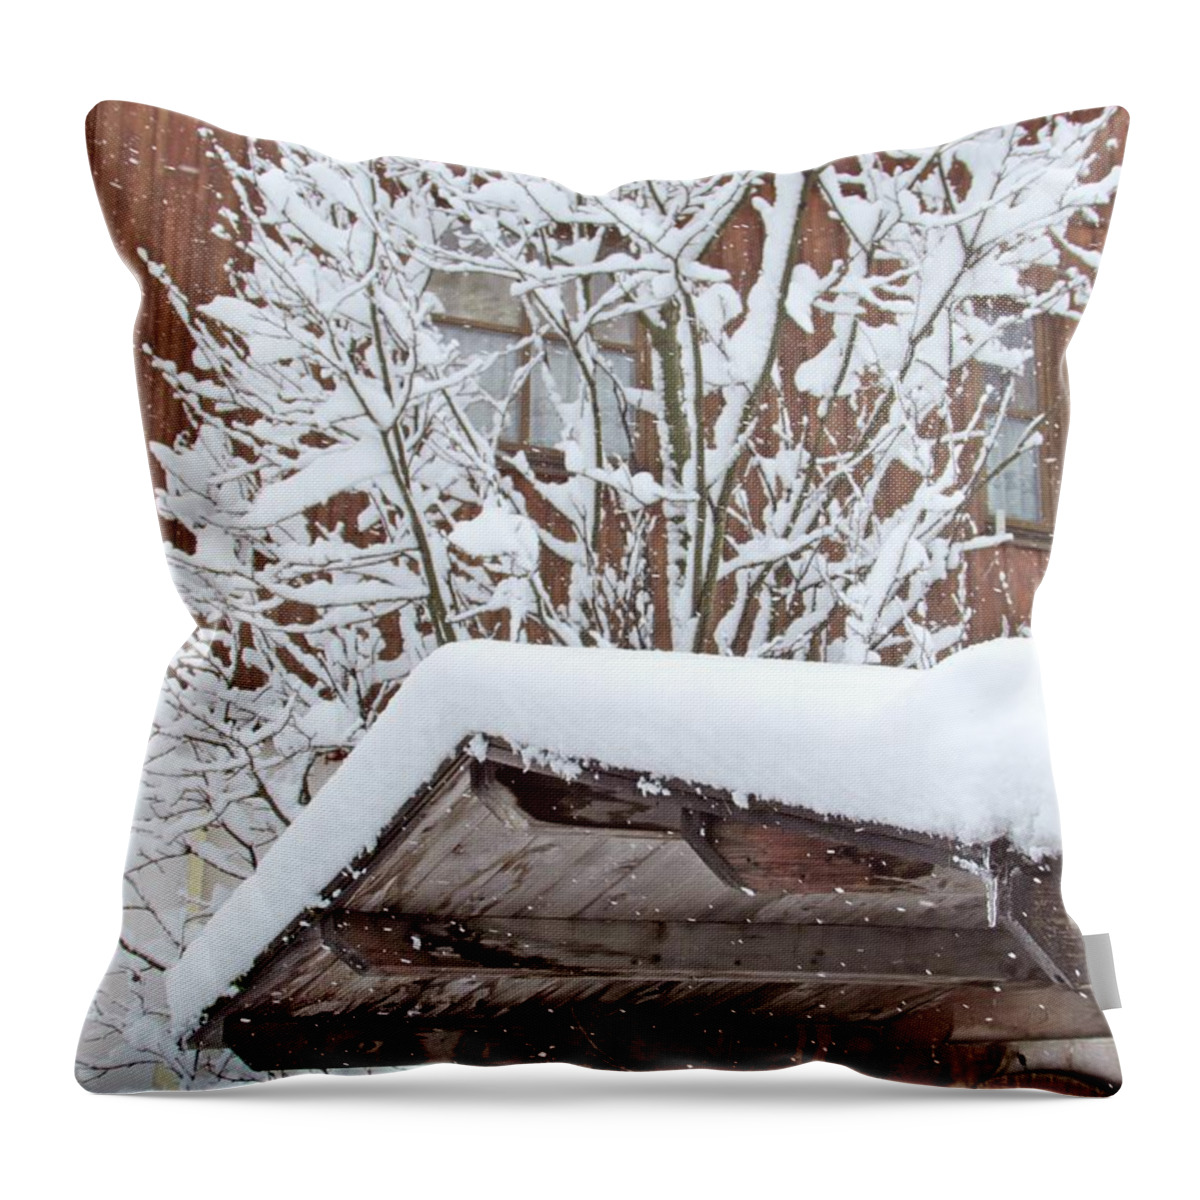 Flower Throw Pillow featuring the photograph After Snowing by Cesar Vieira